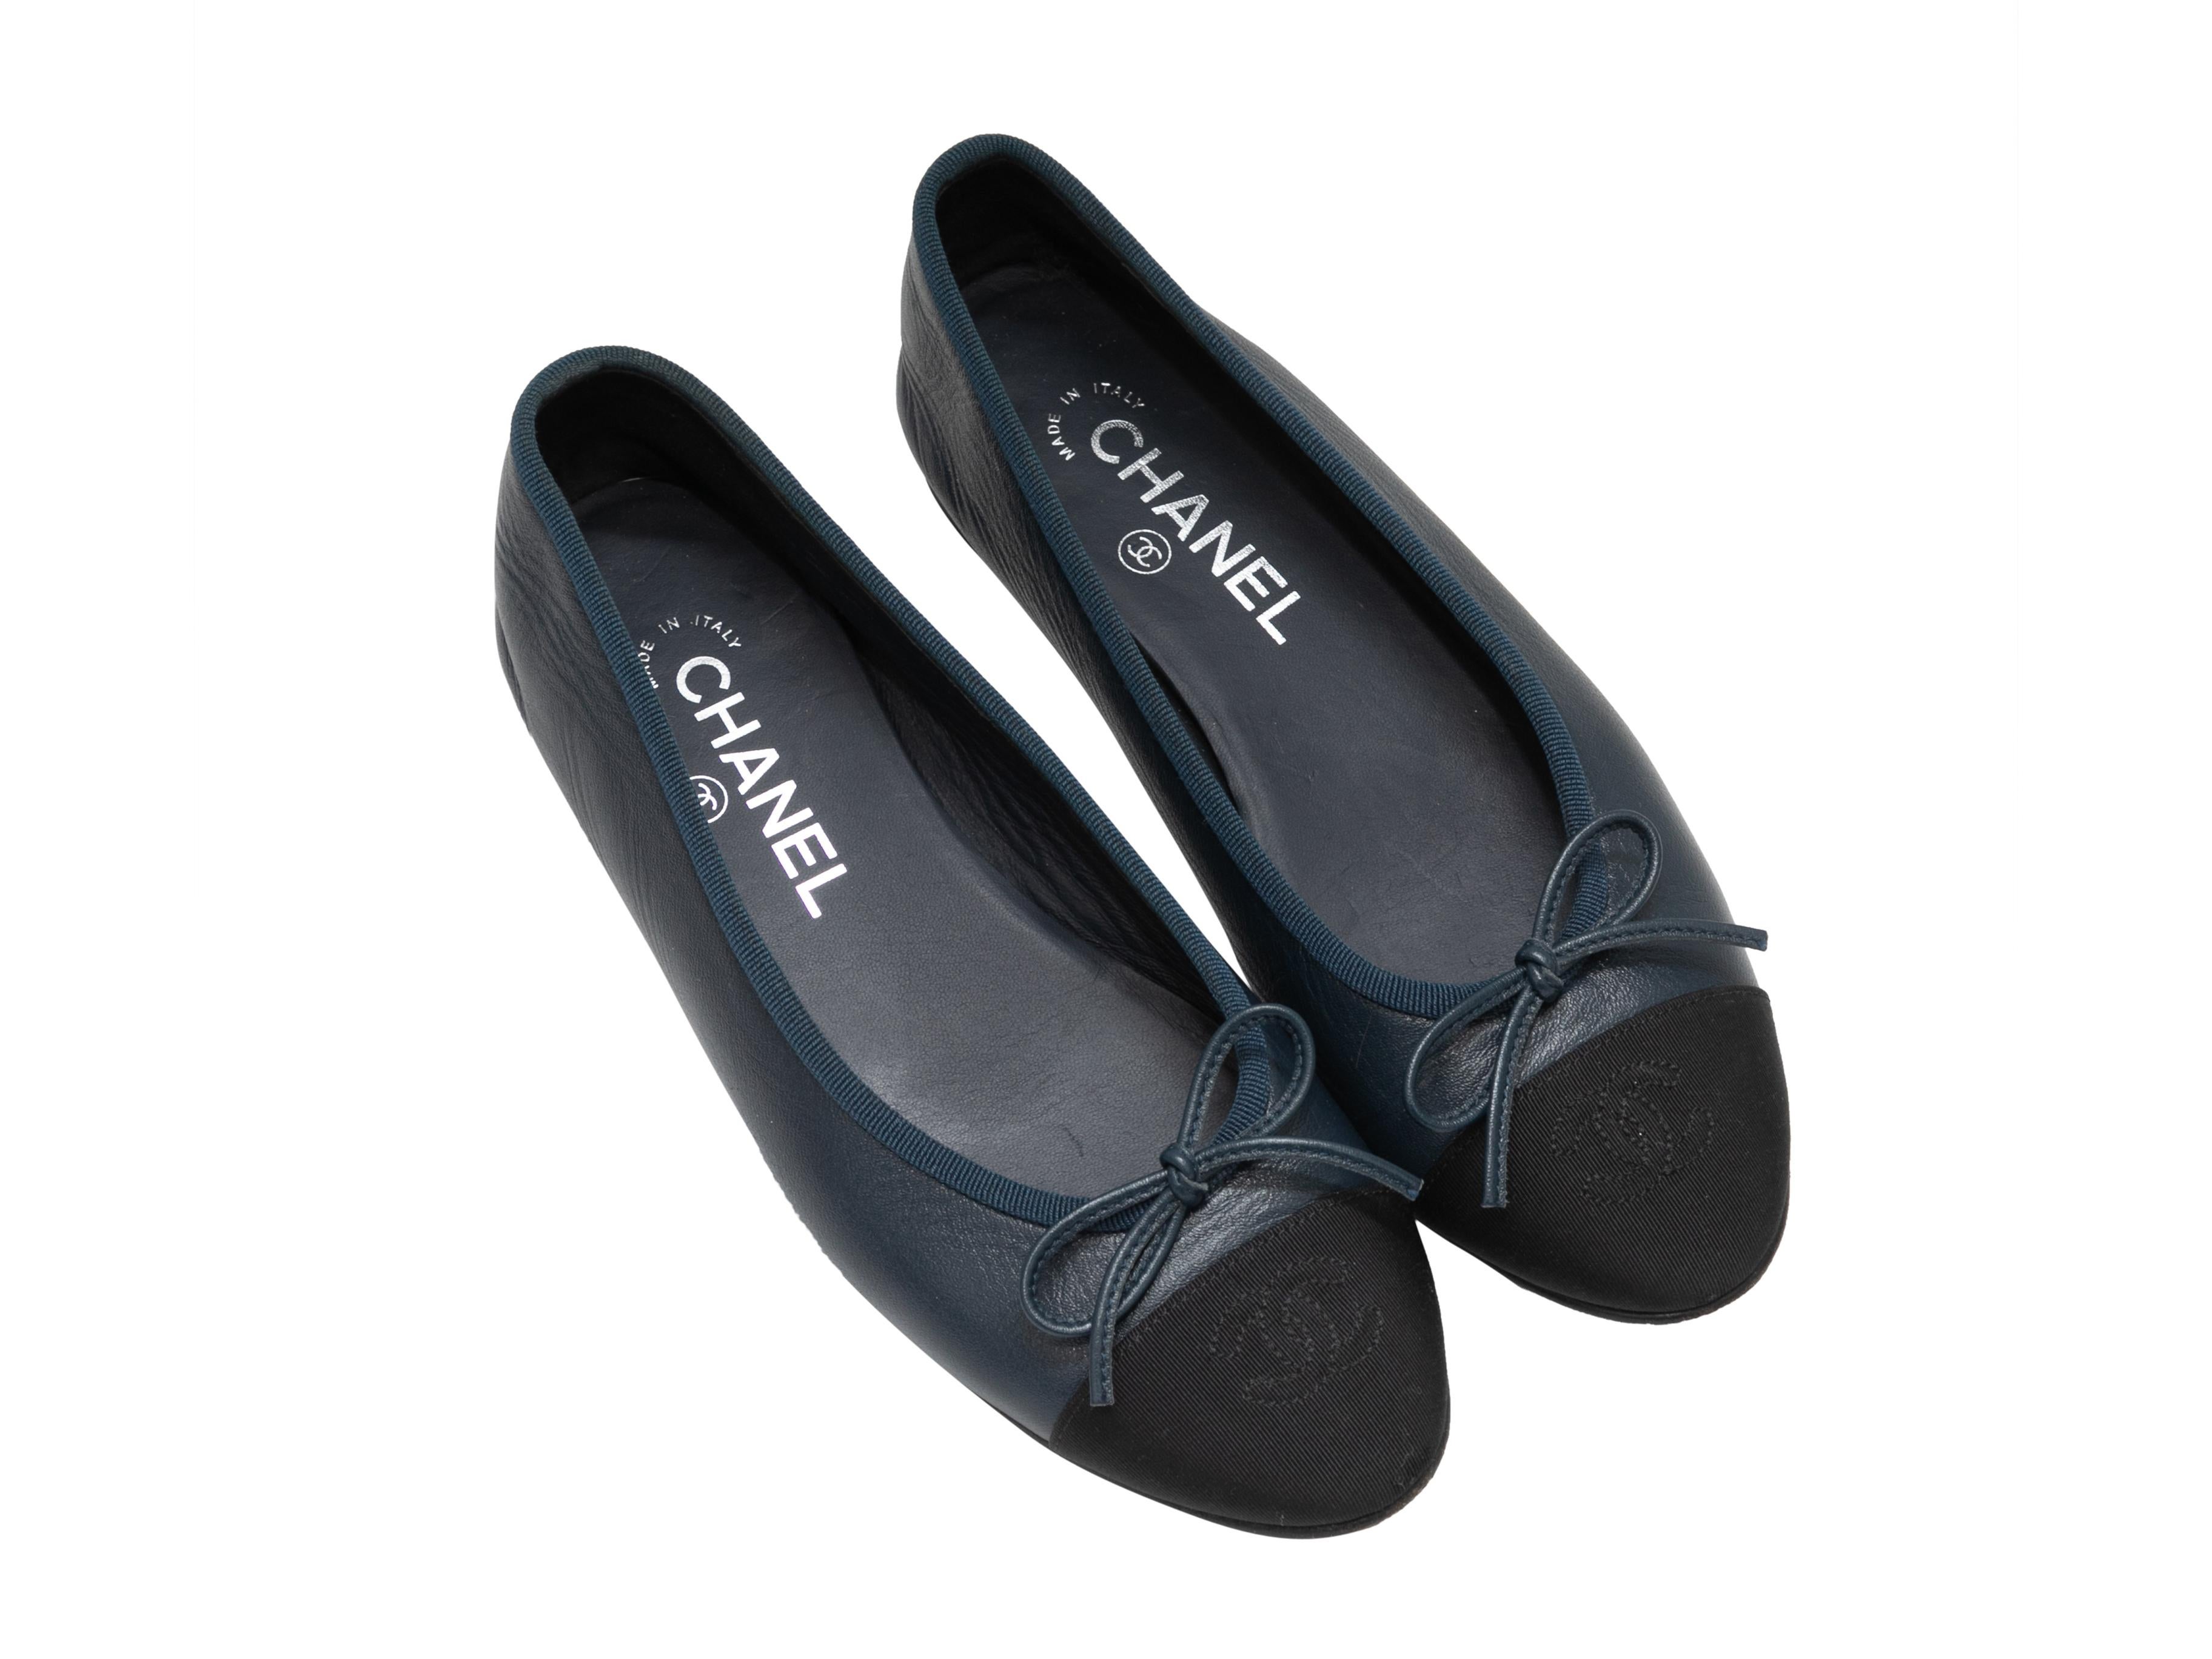 Navy leather and black grosgrain cap-toe ballet flats by Chanel. CC logo embroidery and bow accents at tops.

Designer Size: 36.5
US Recommended Size: 6.5